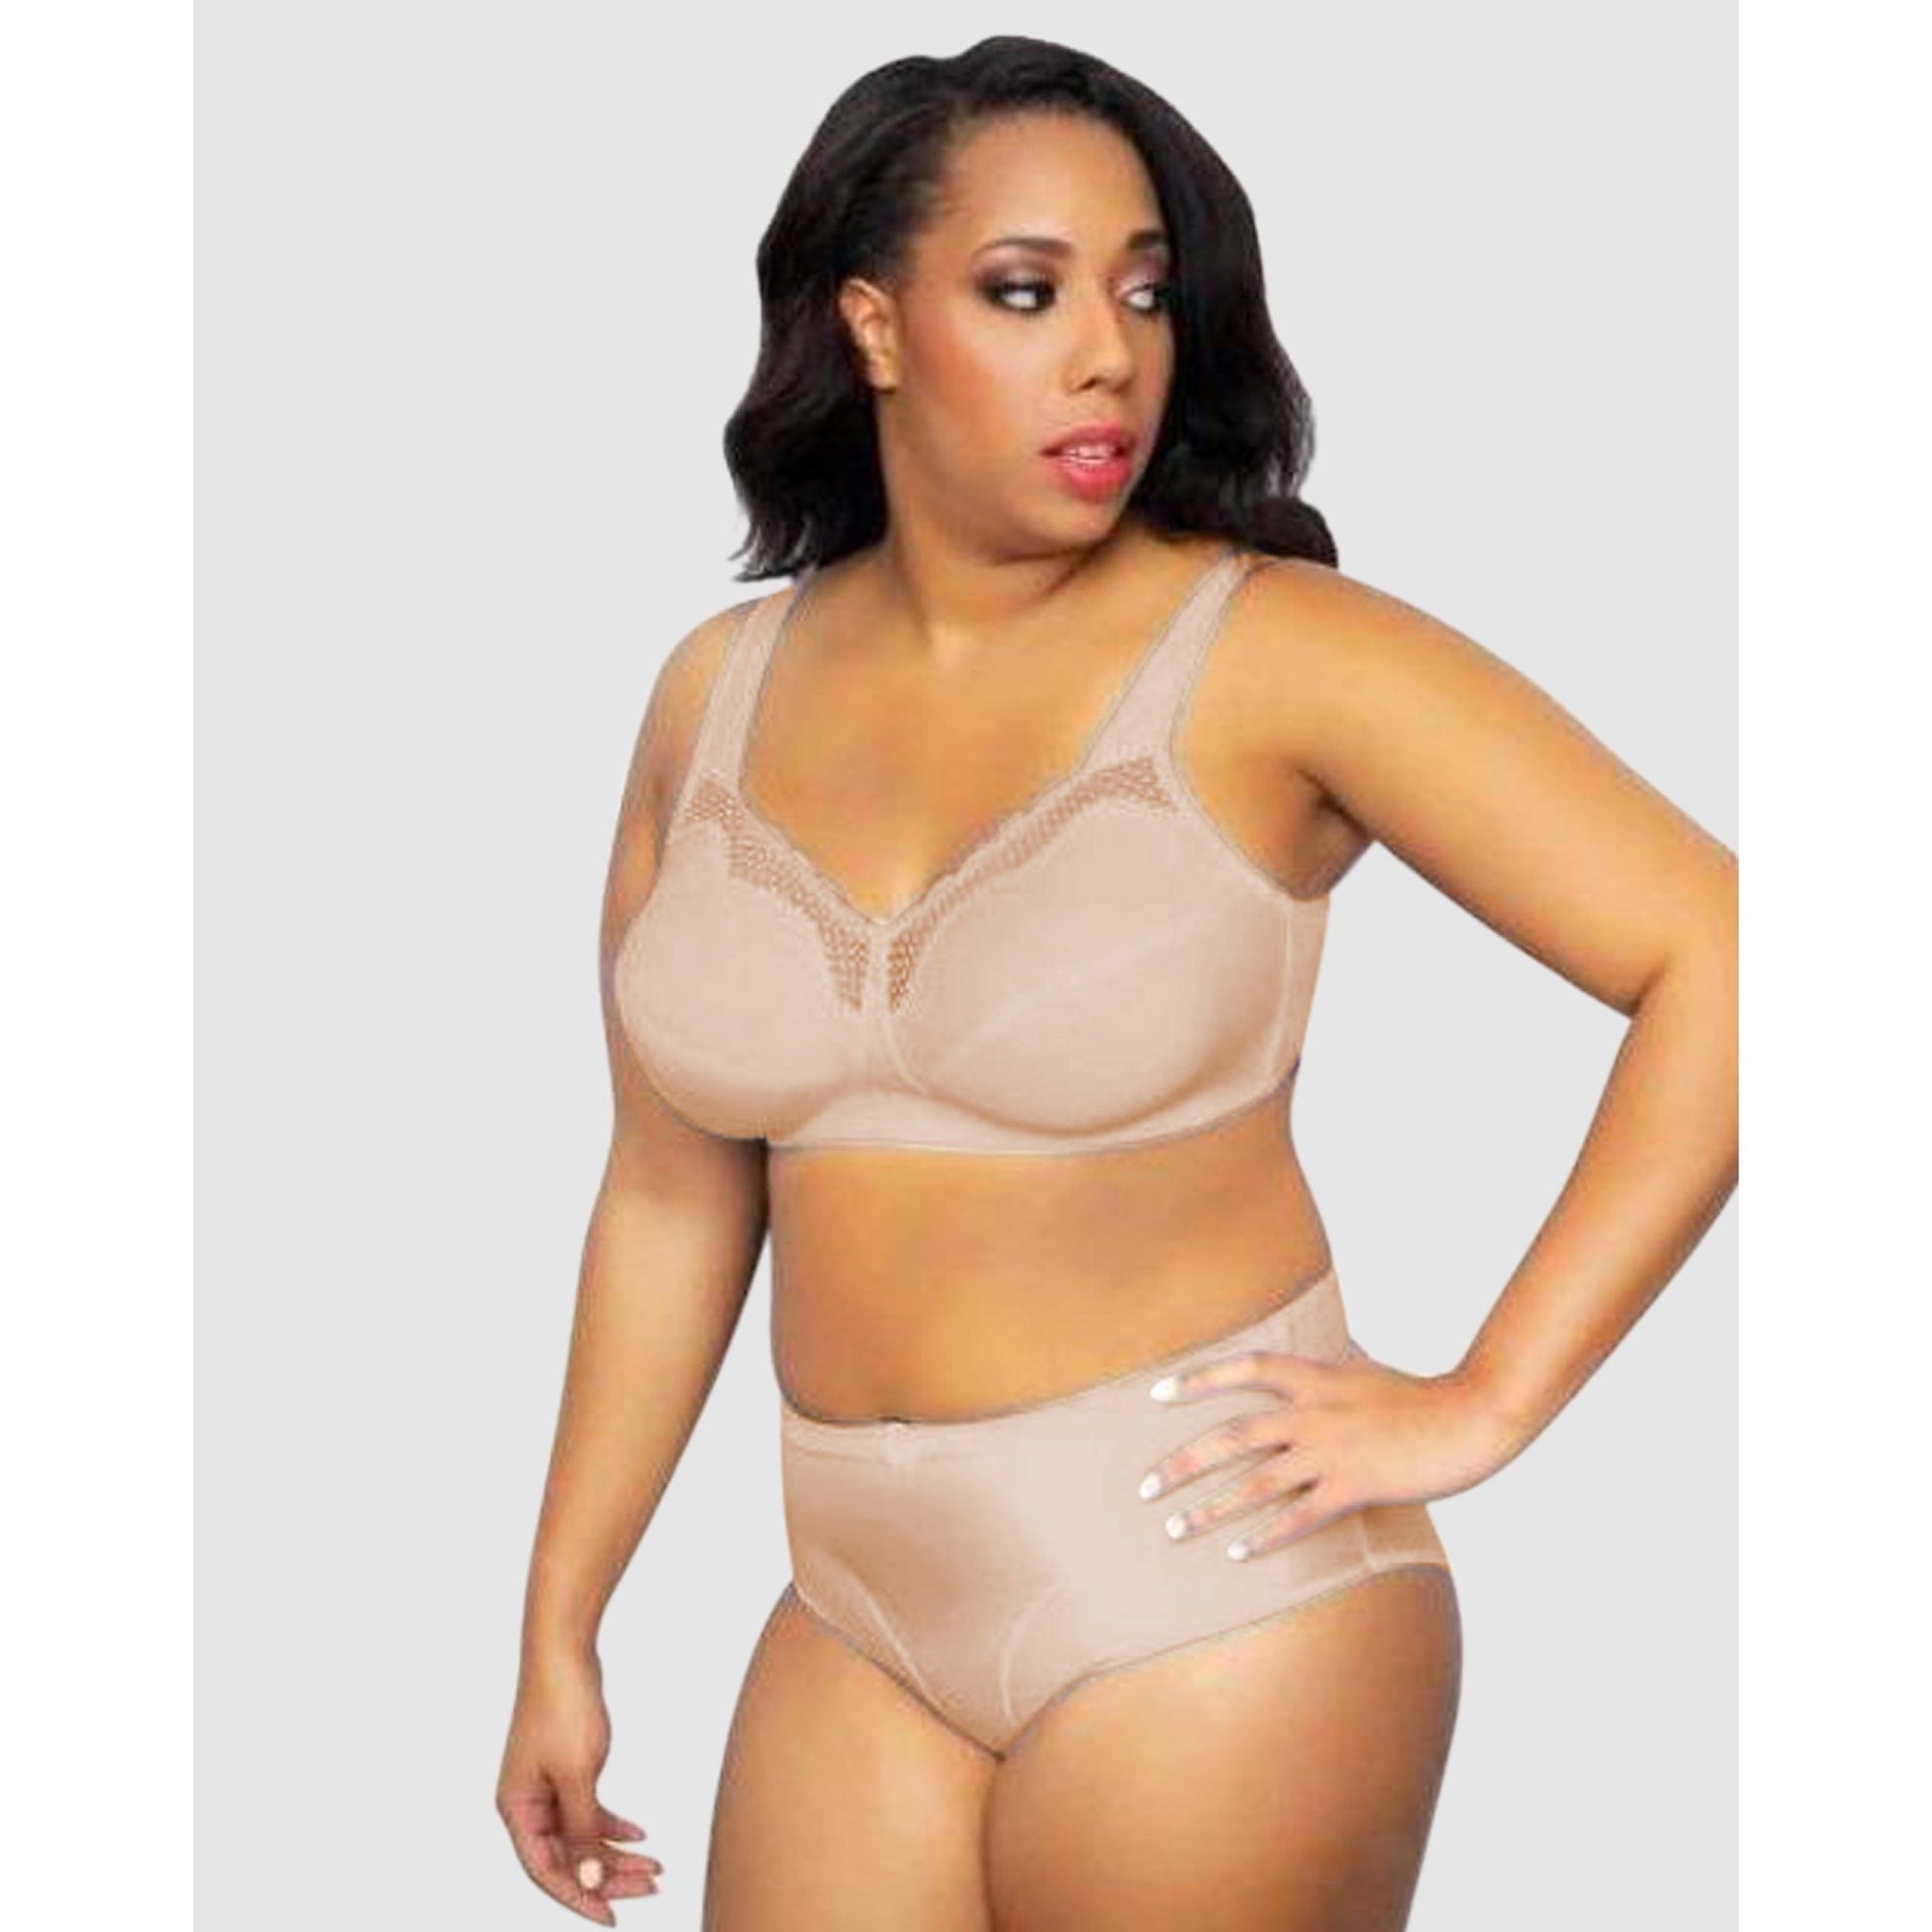 Plus Size Wireless Cotton Soft Cup Bra - Style Gallery